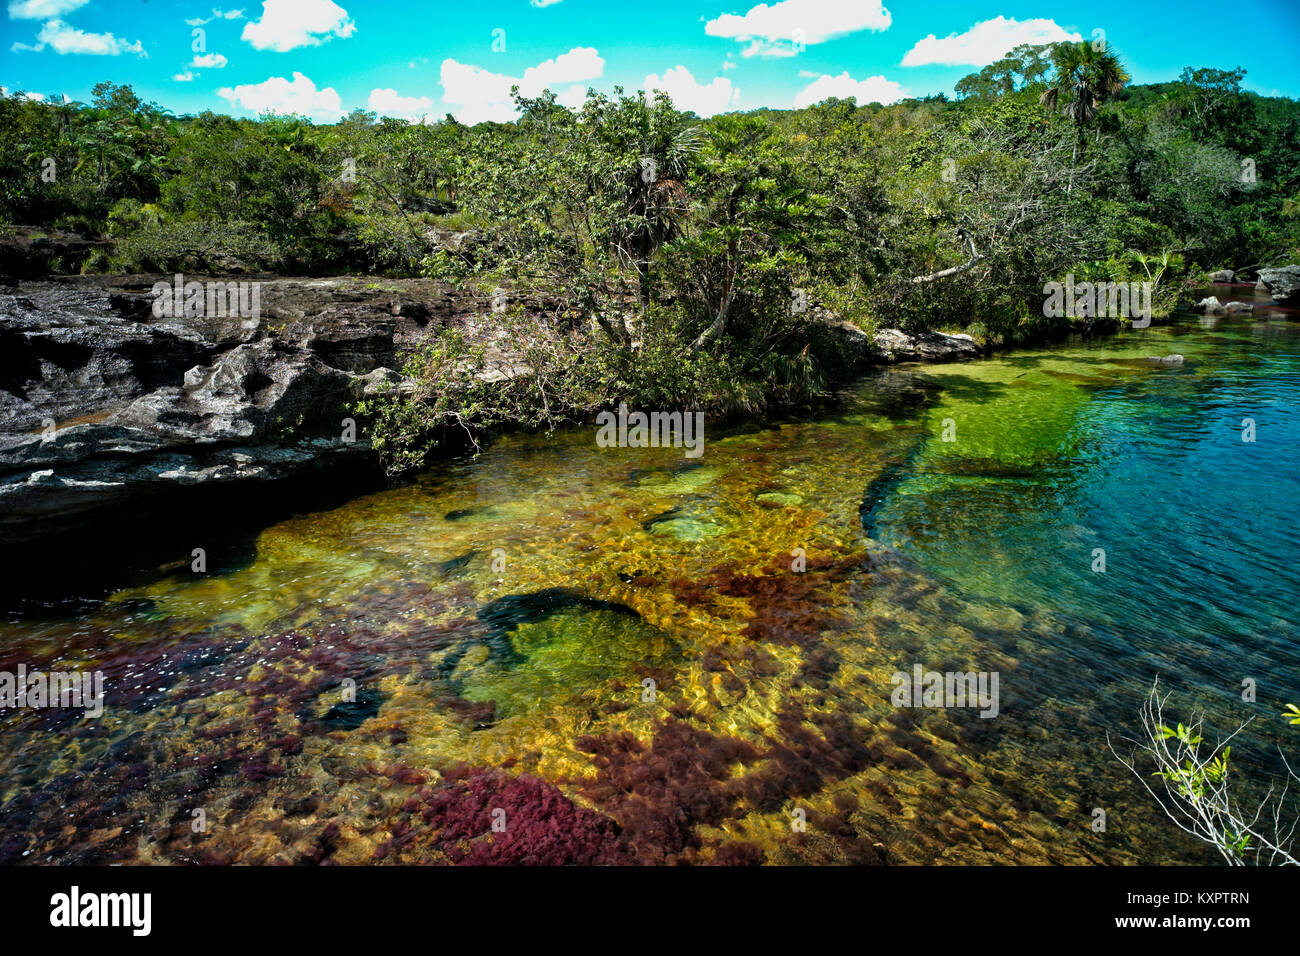 Colorful endemic freshwater plants known as macarenia clavigera create colorful natural tapestries at Los Ochos section of the Cano Cristales river, c Stock Photo